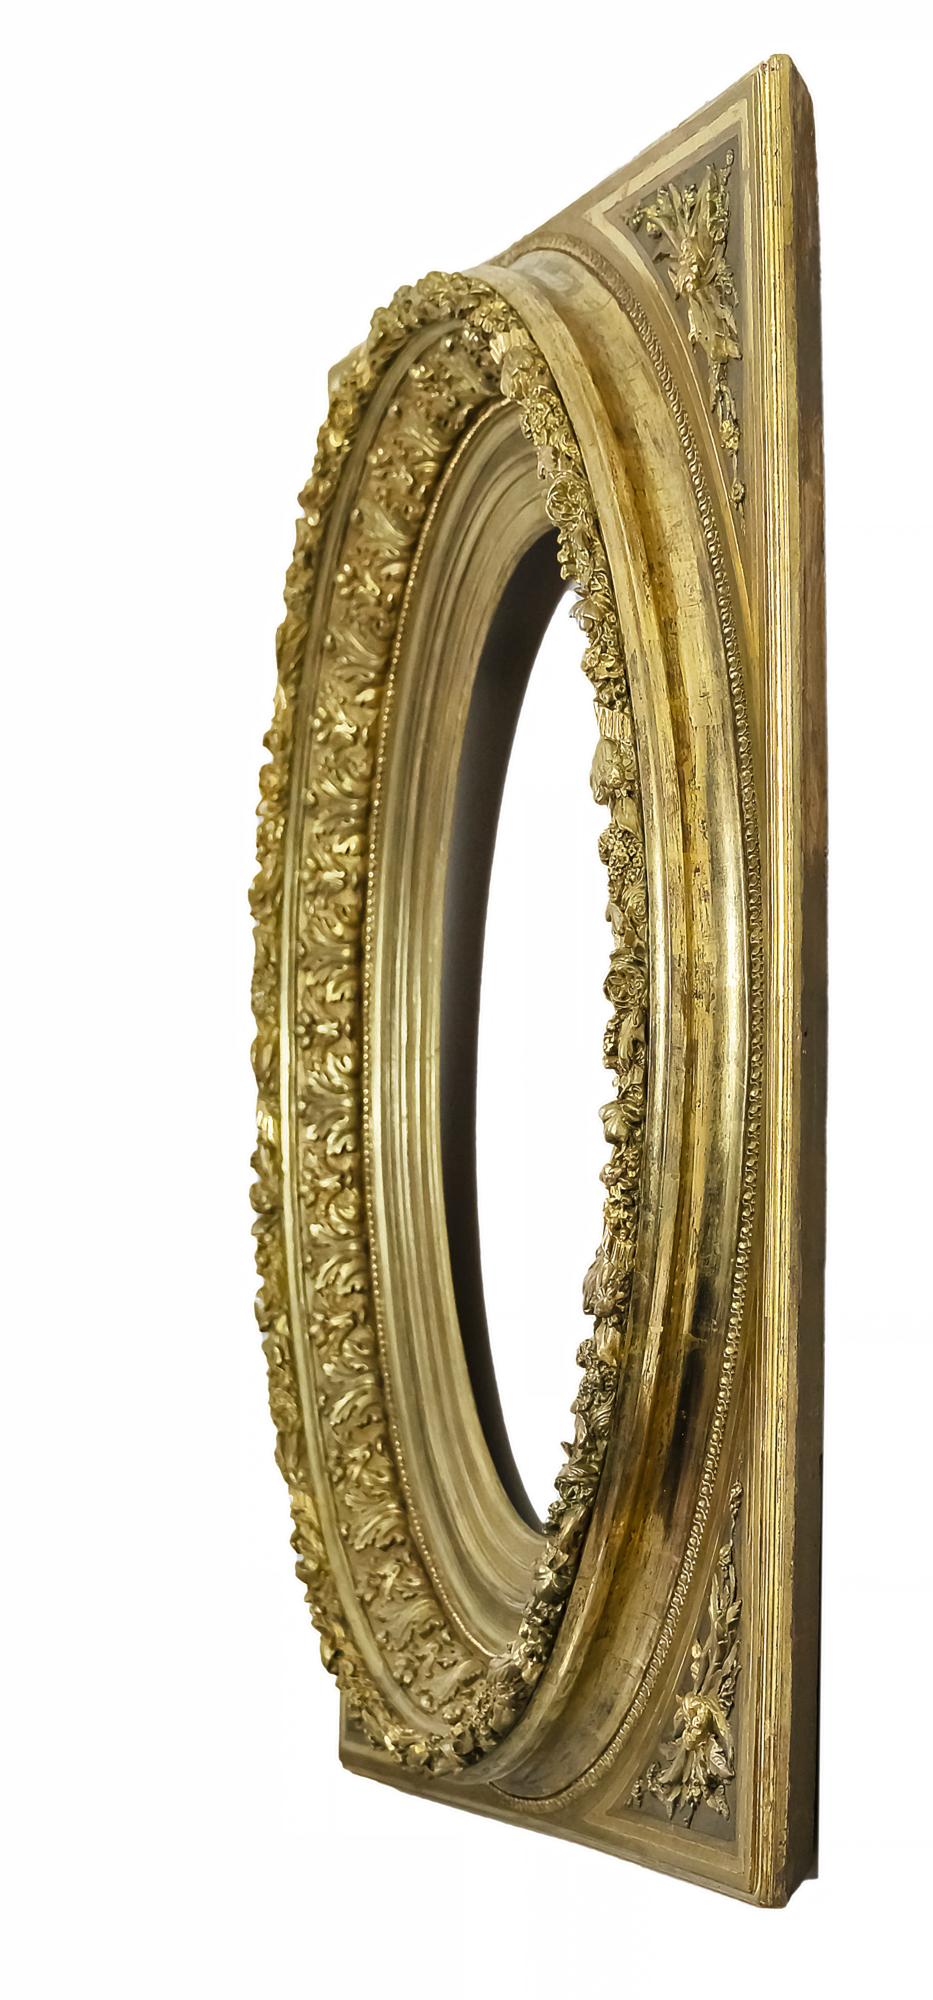 Antique french hand carved giltwood frame from the late 18th century.
The ornaments are decorated in two tone gold - matt and glossy.
Can be used for the painting or mirror.